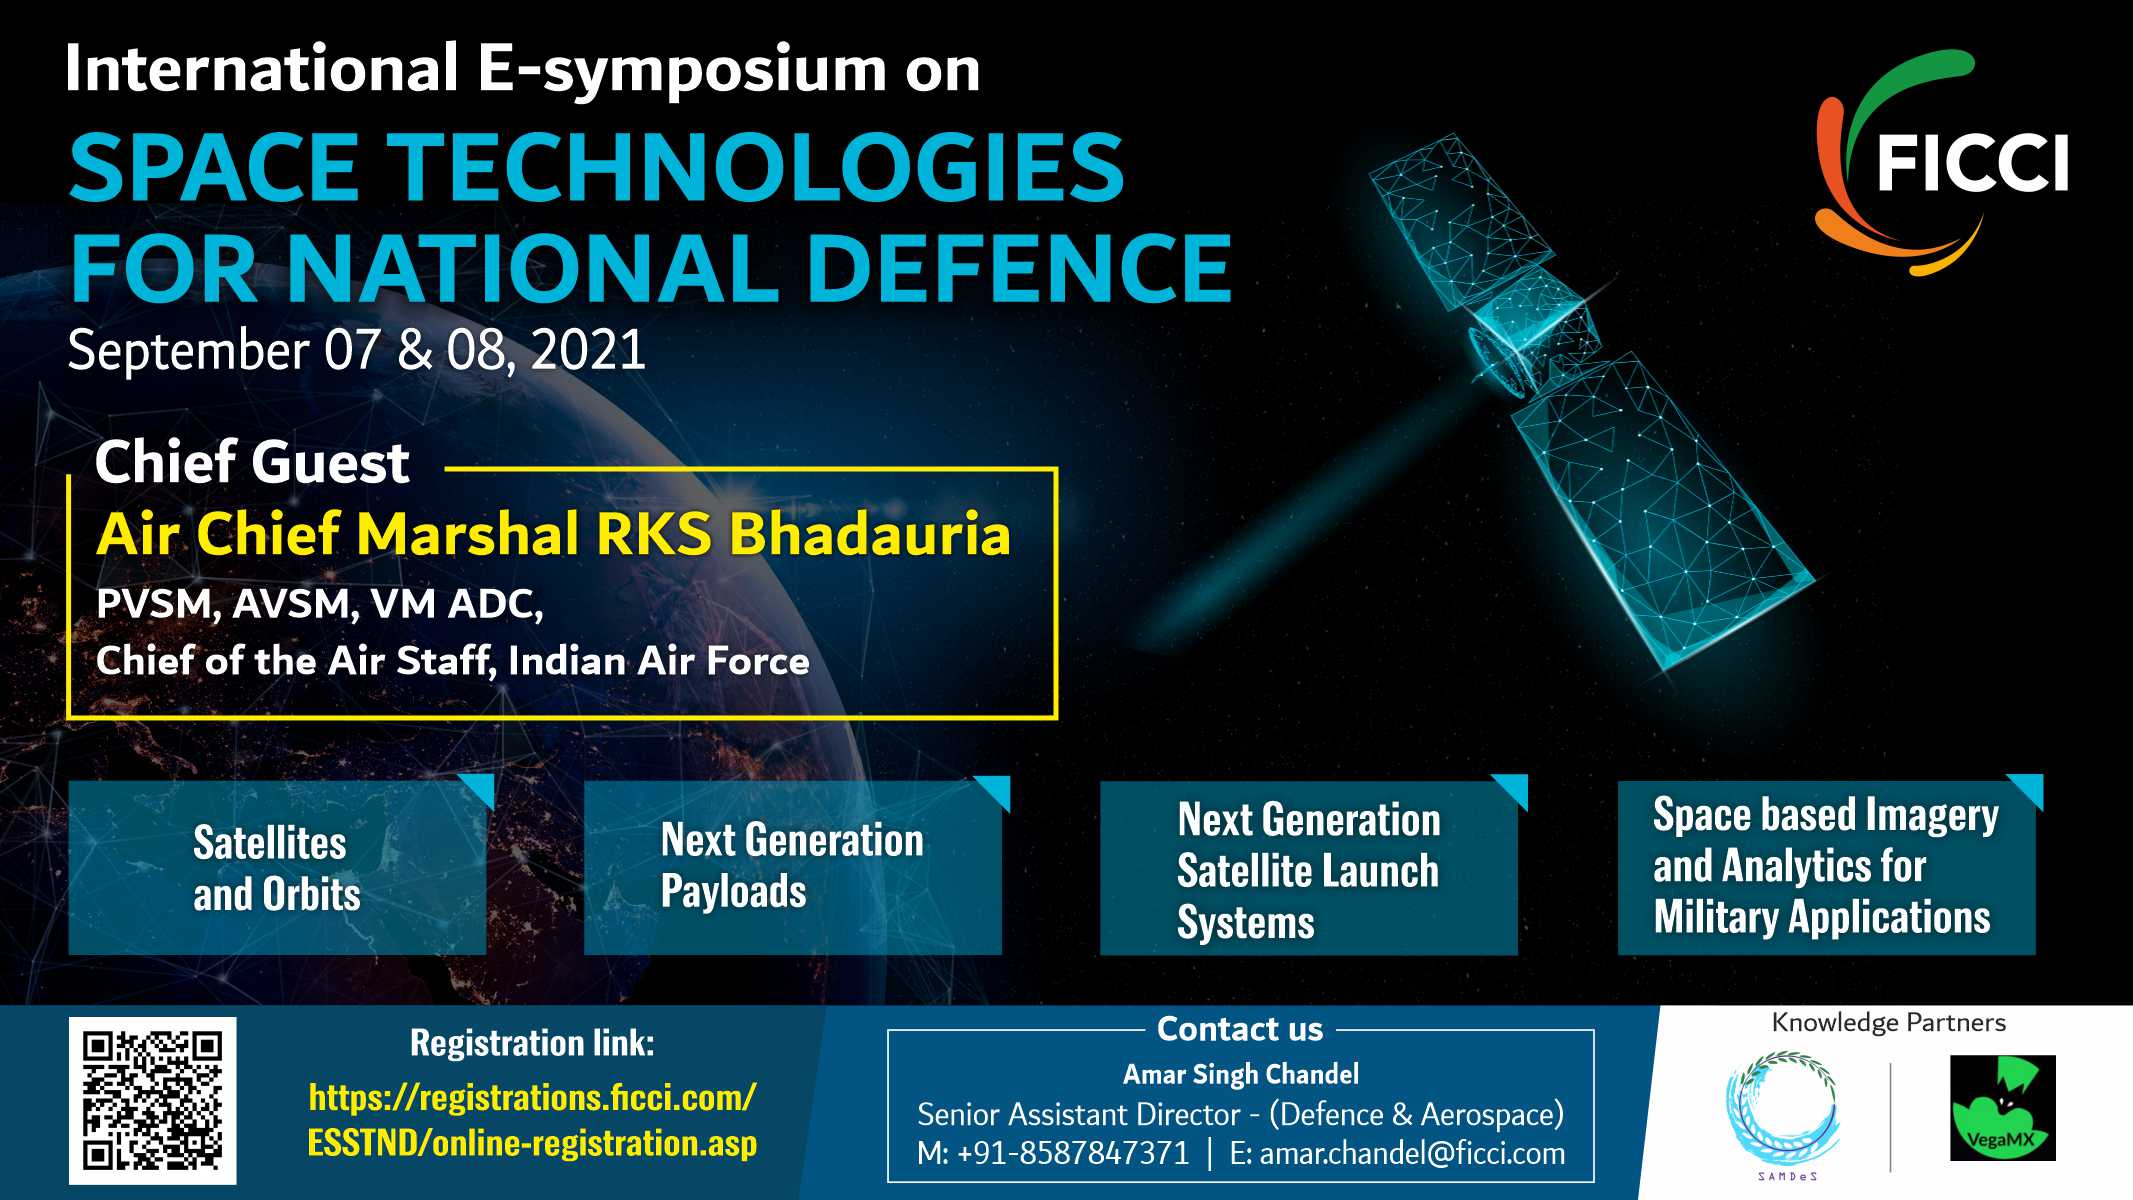 Space technologies for National Defence